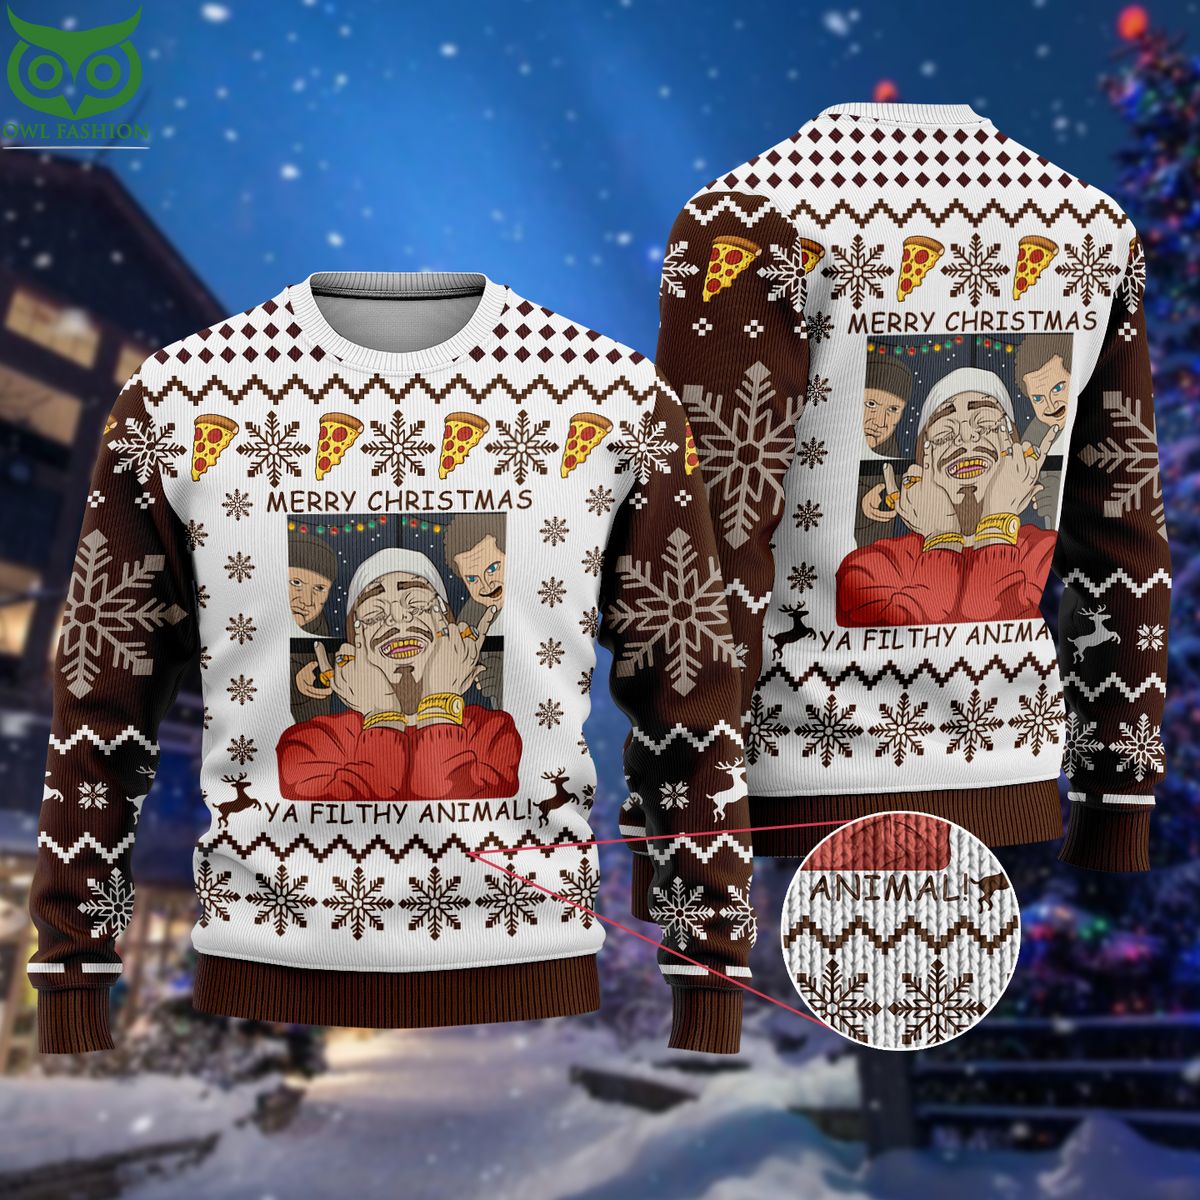 Amazing Home Alone Filthy Animal Christmas Sweater Jumper